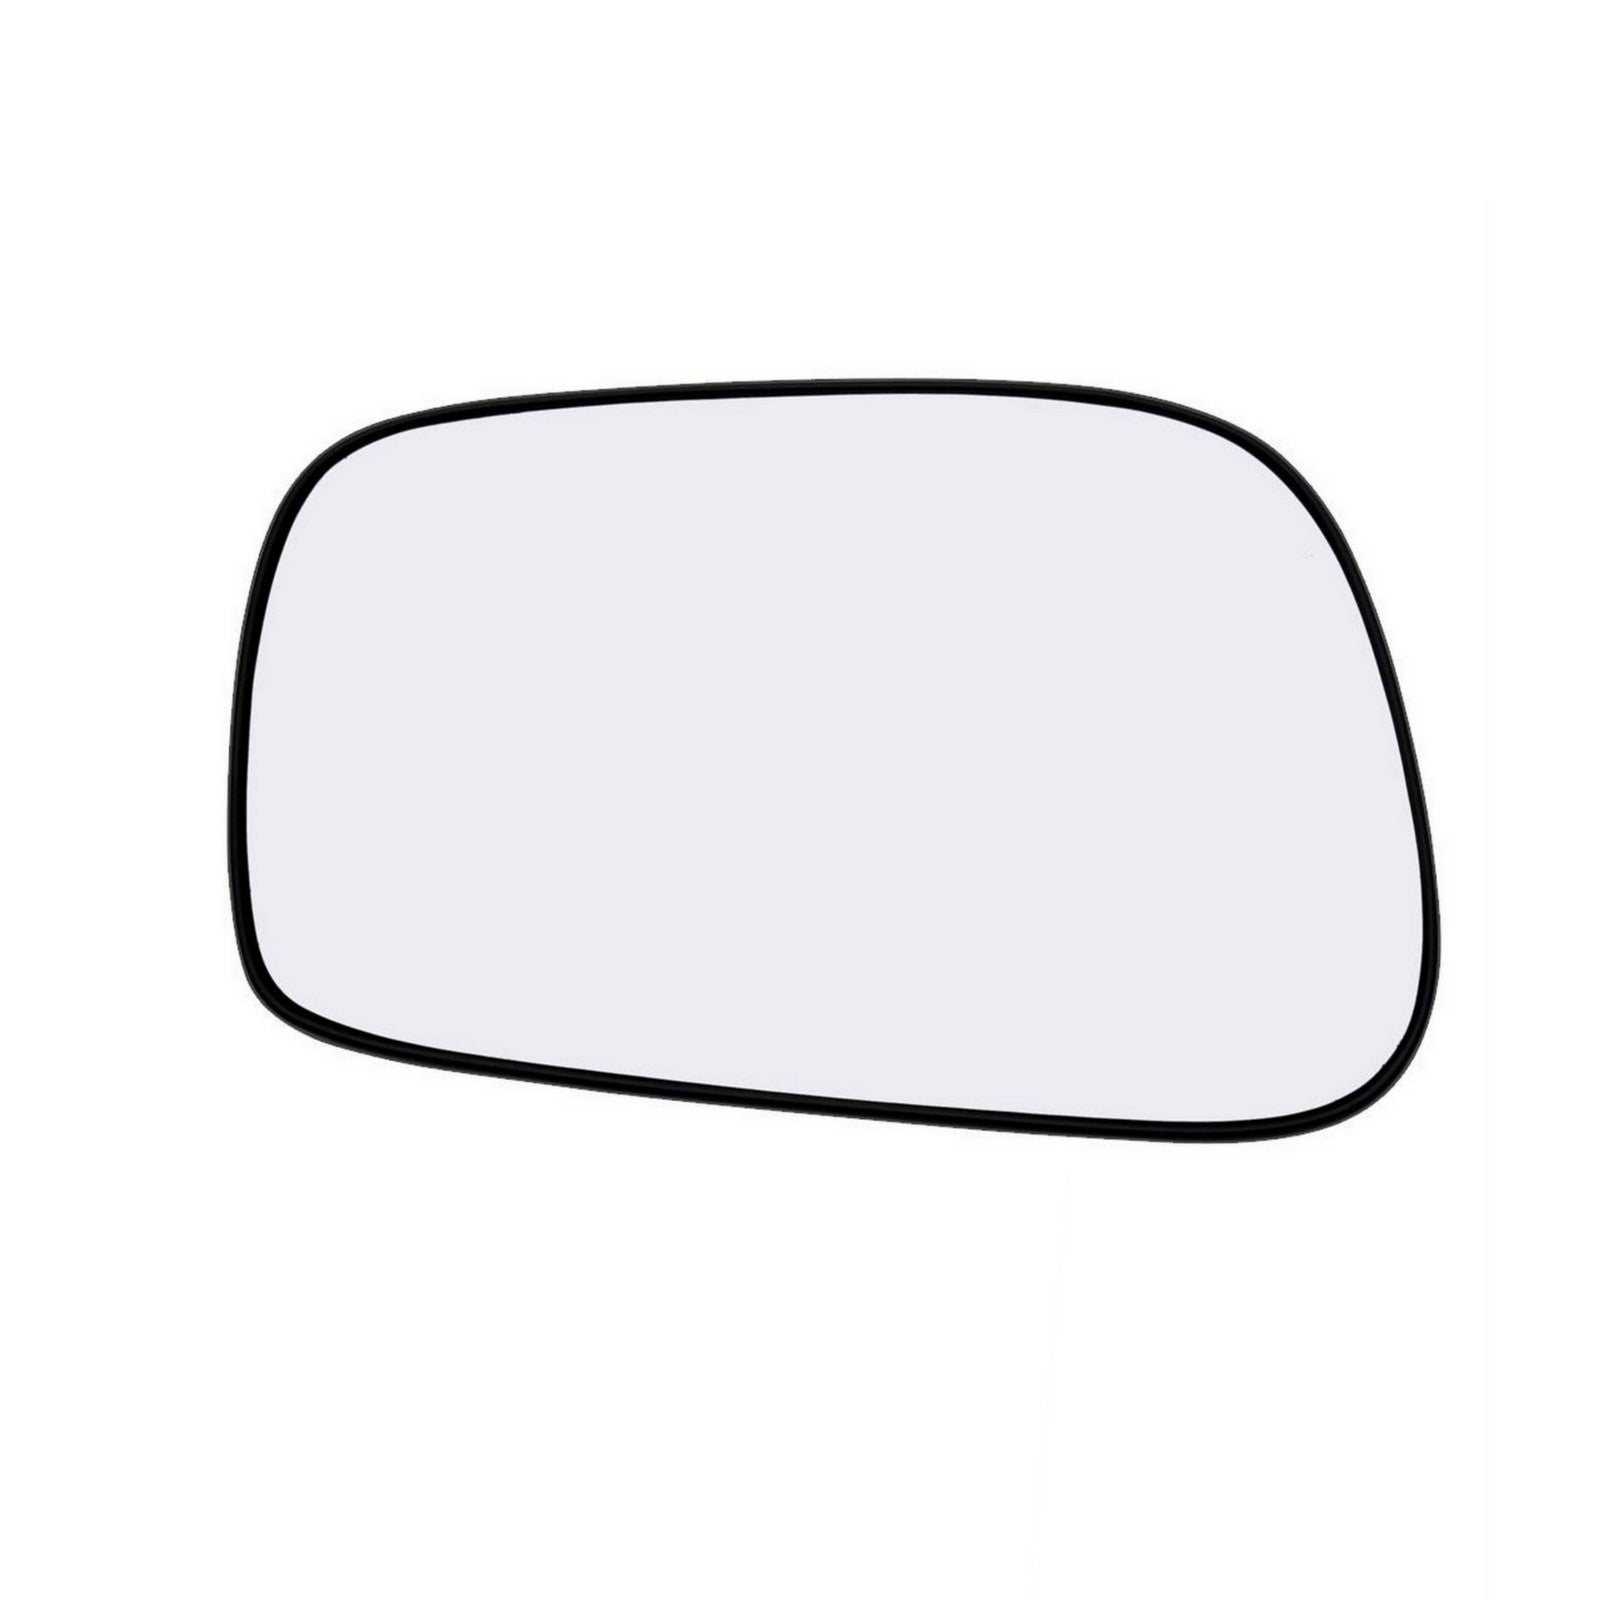 SIDE MIRROR GLASS FOR TOYOTA PRIUS 1800CC (2012-2018)